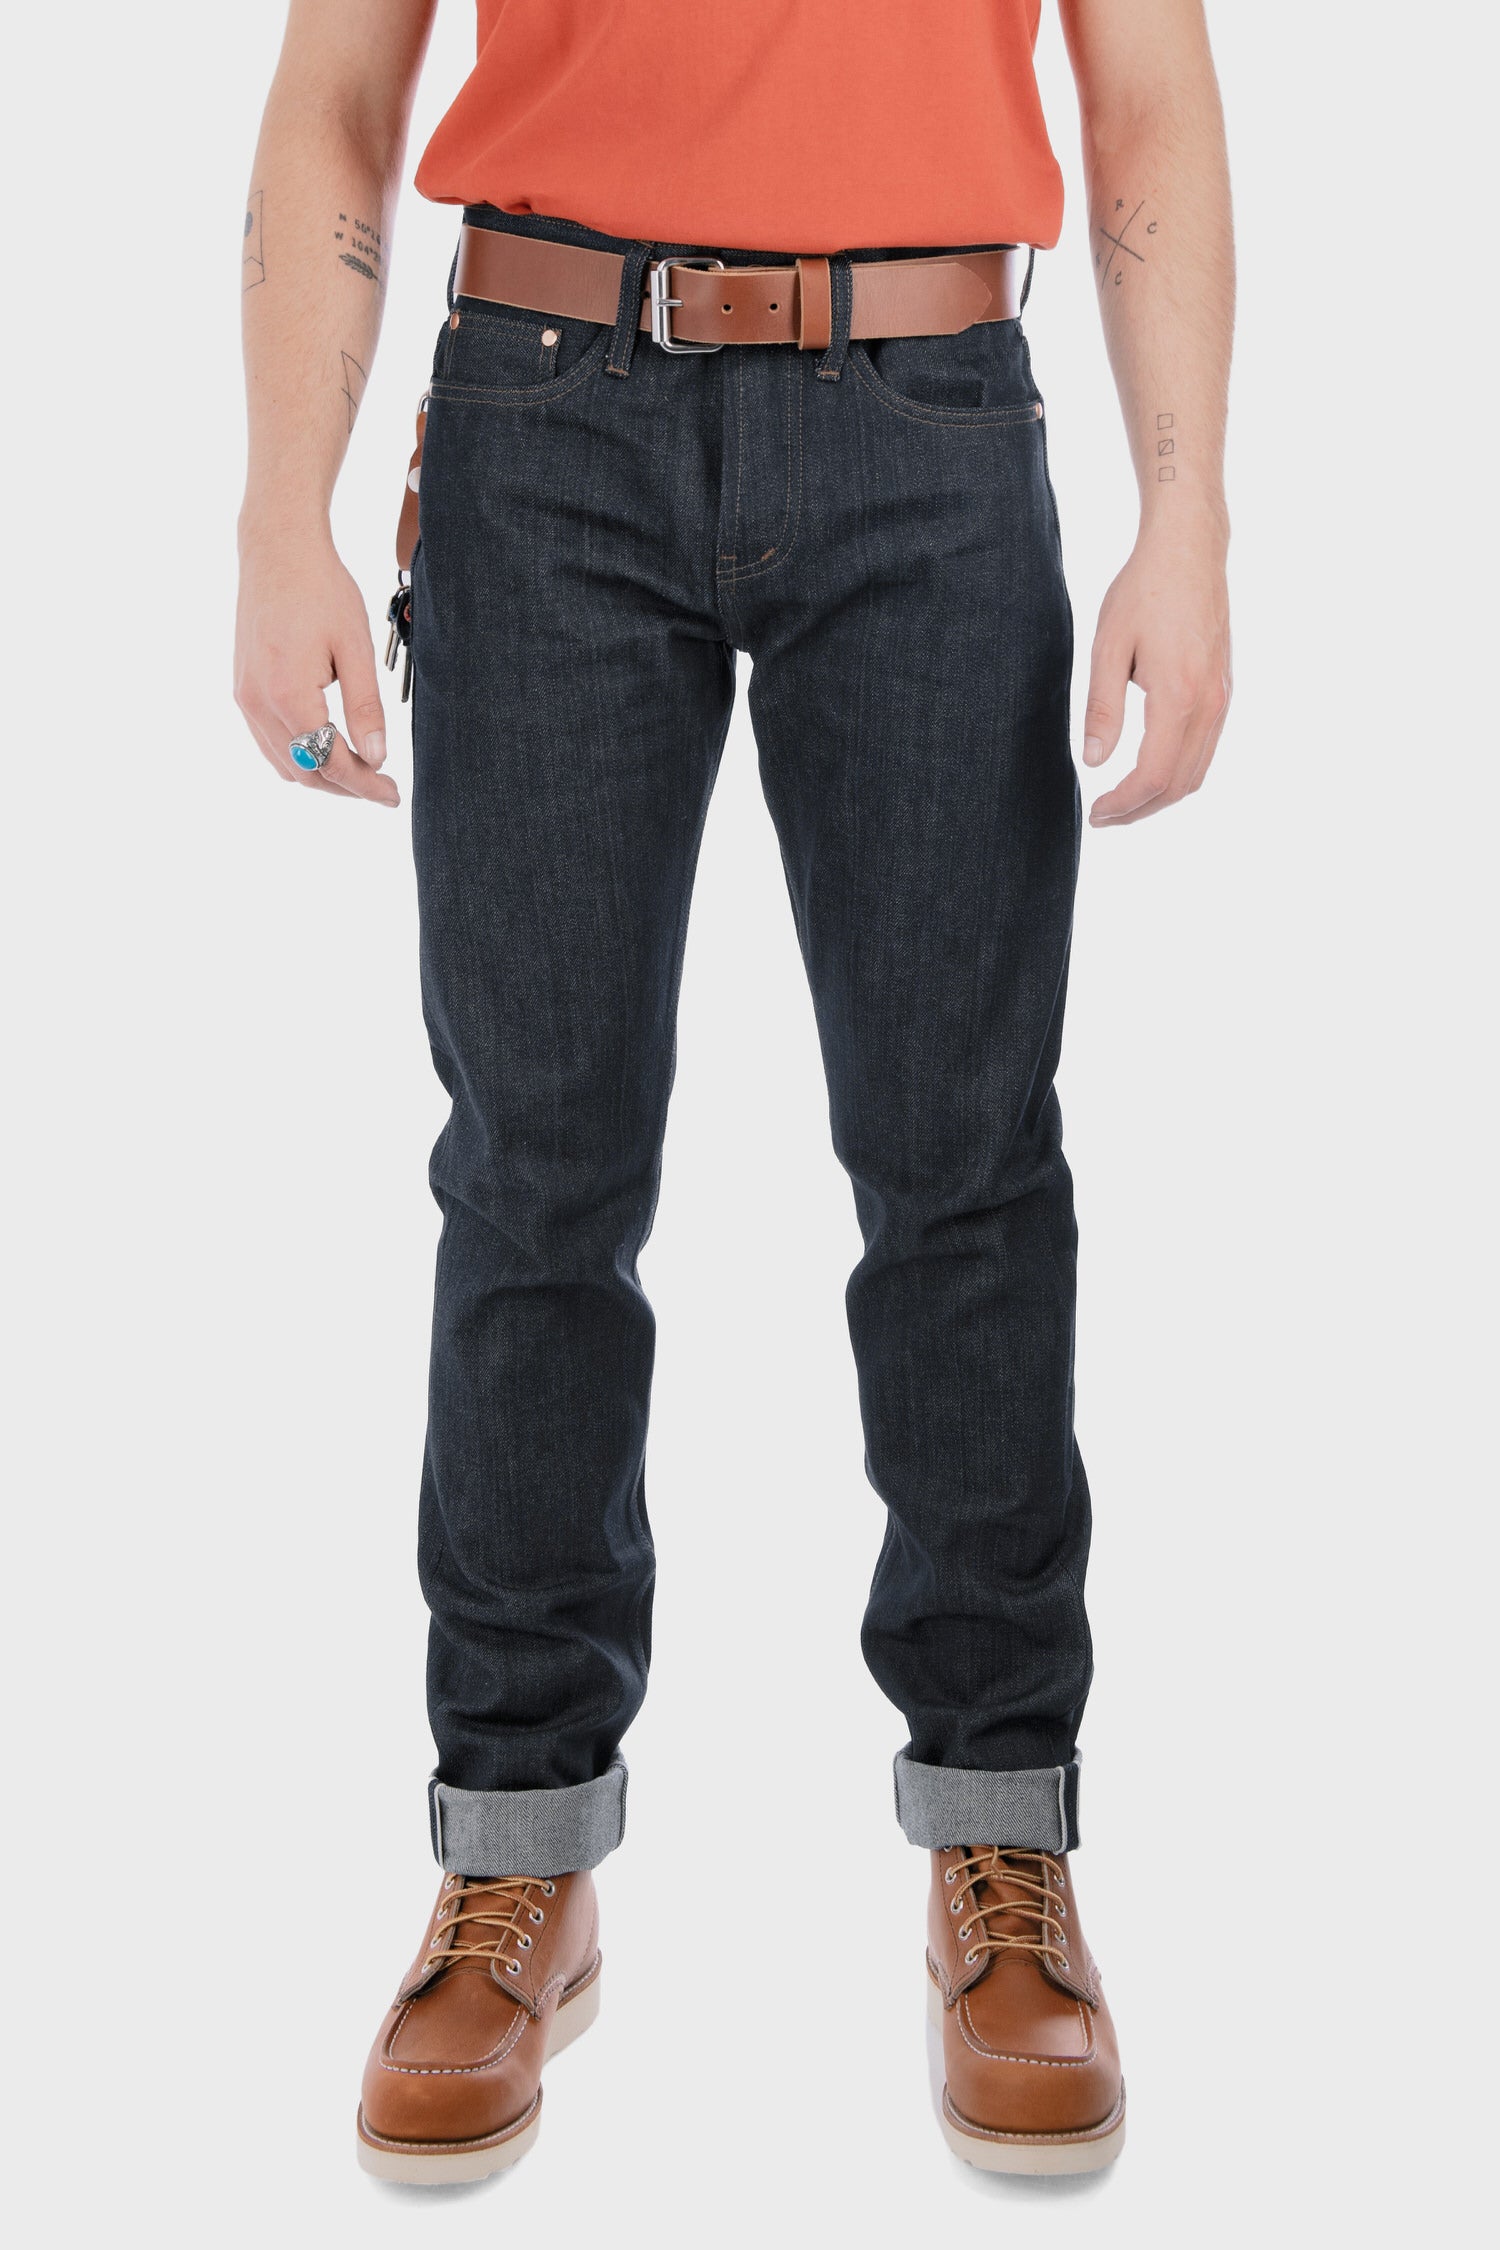 Unbranded Tapered Fit in Indigo